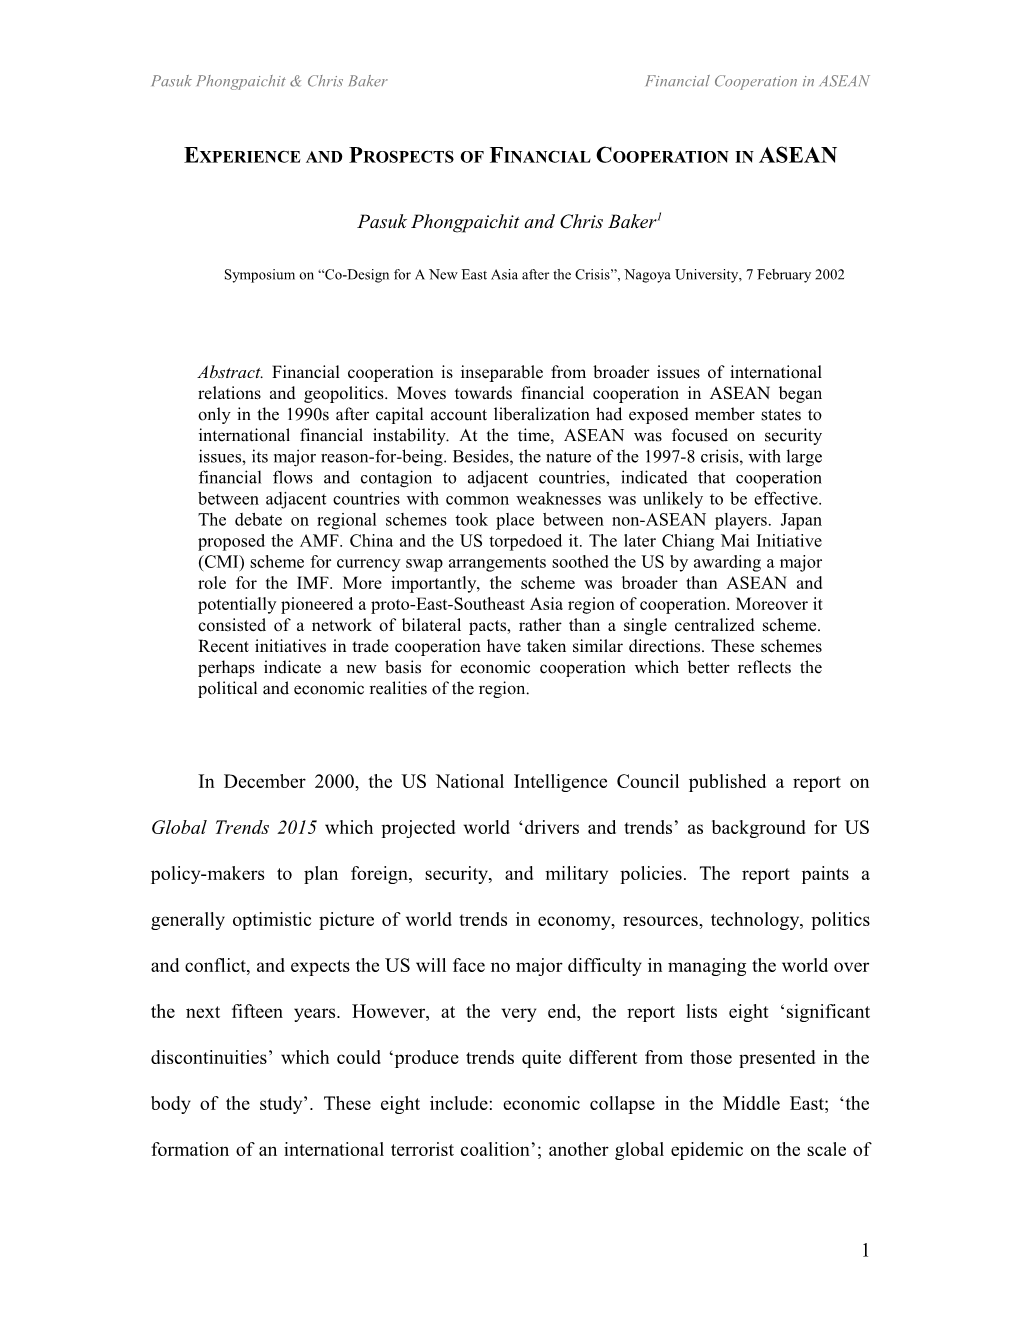 Experience and Prospects of Financial Cooperation in ASEAN